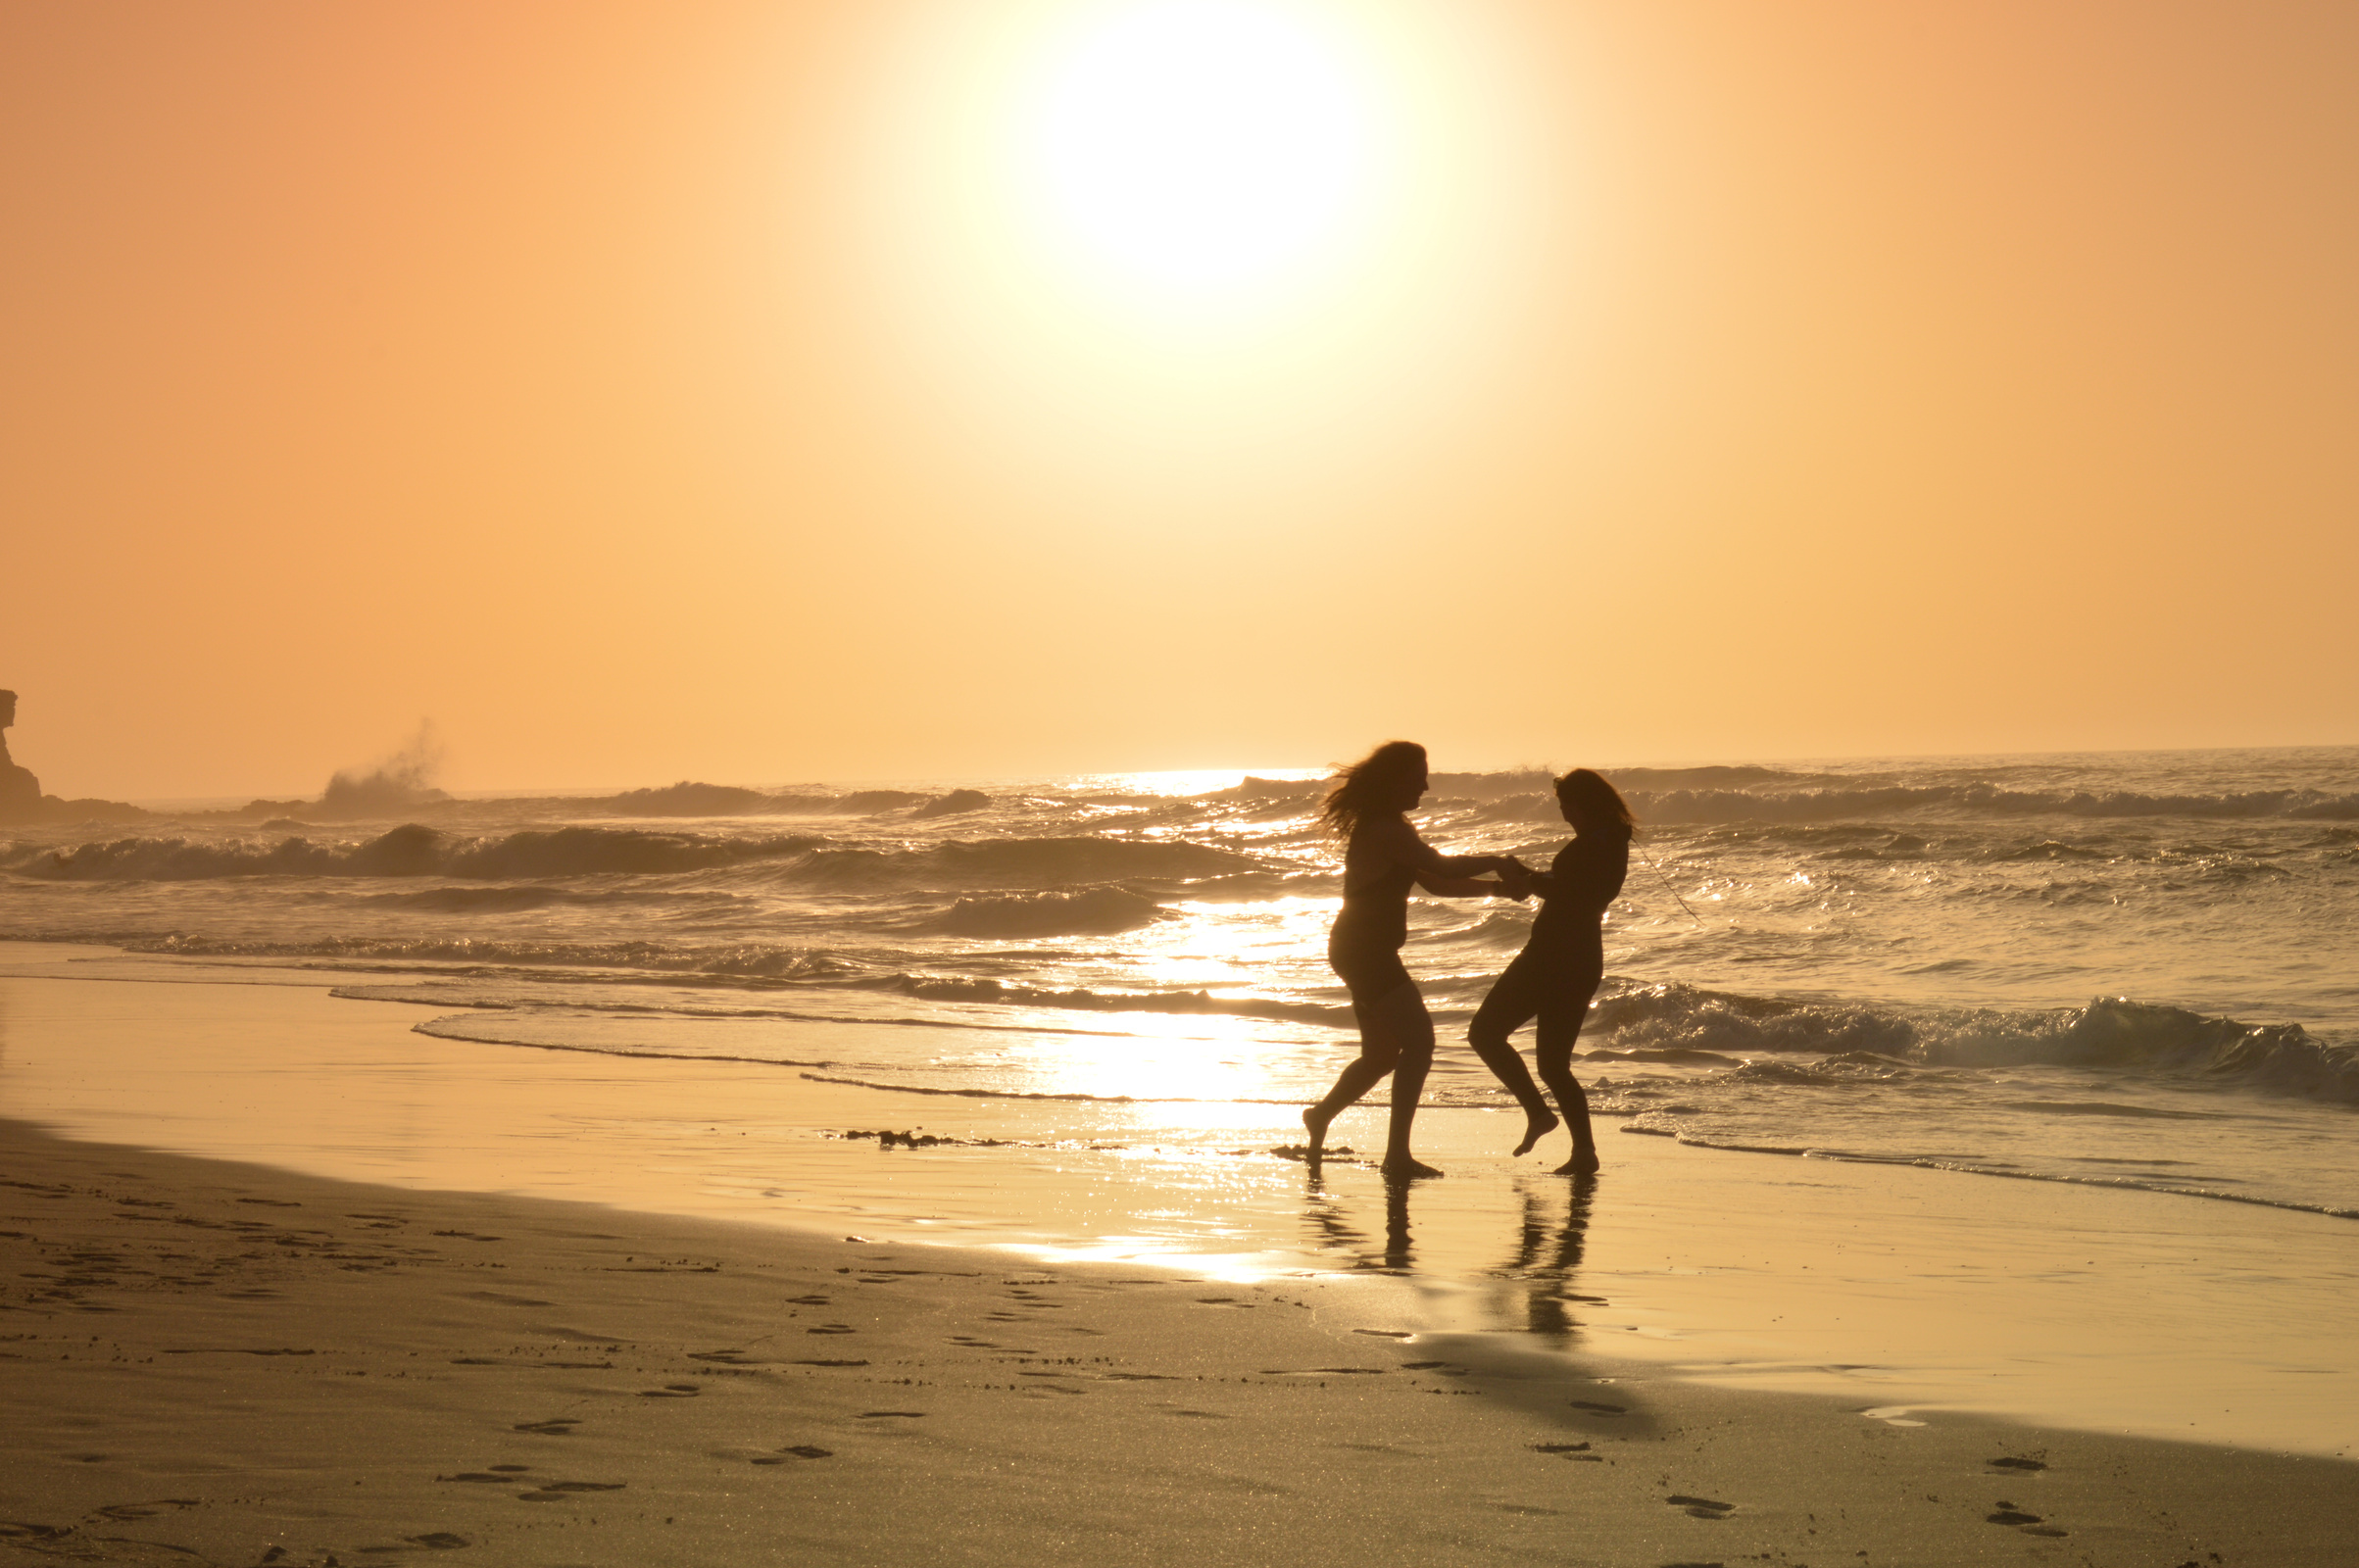 Background image: Two women playing holding hands at sunset on a beach.